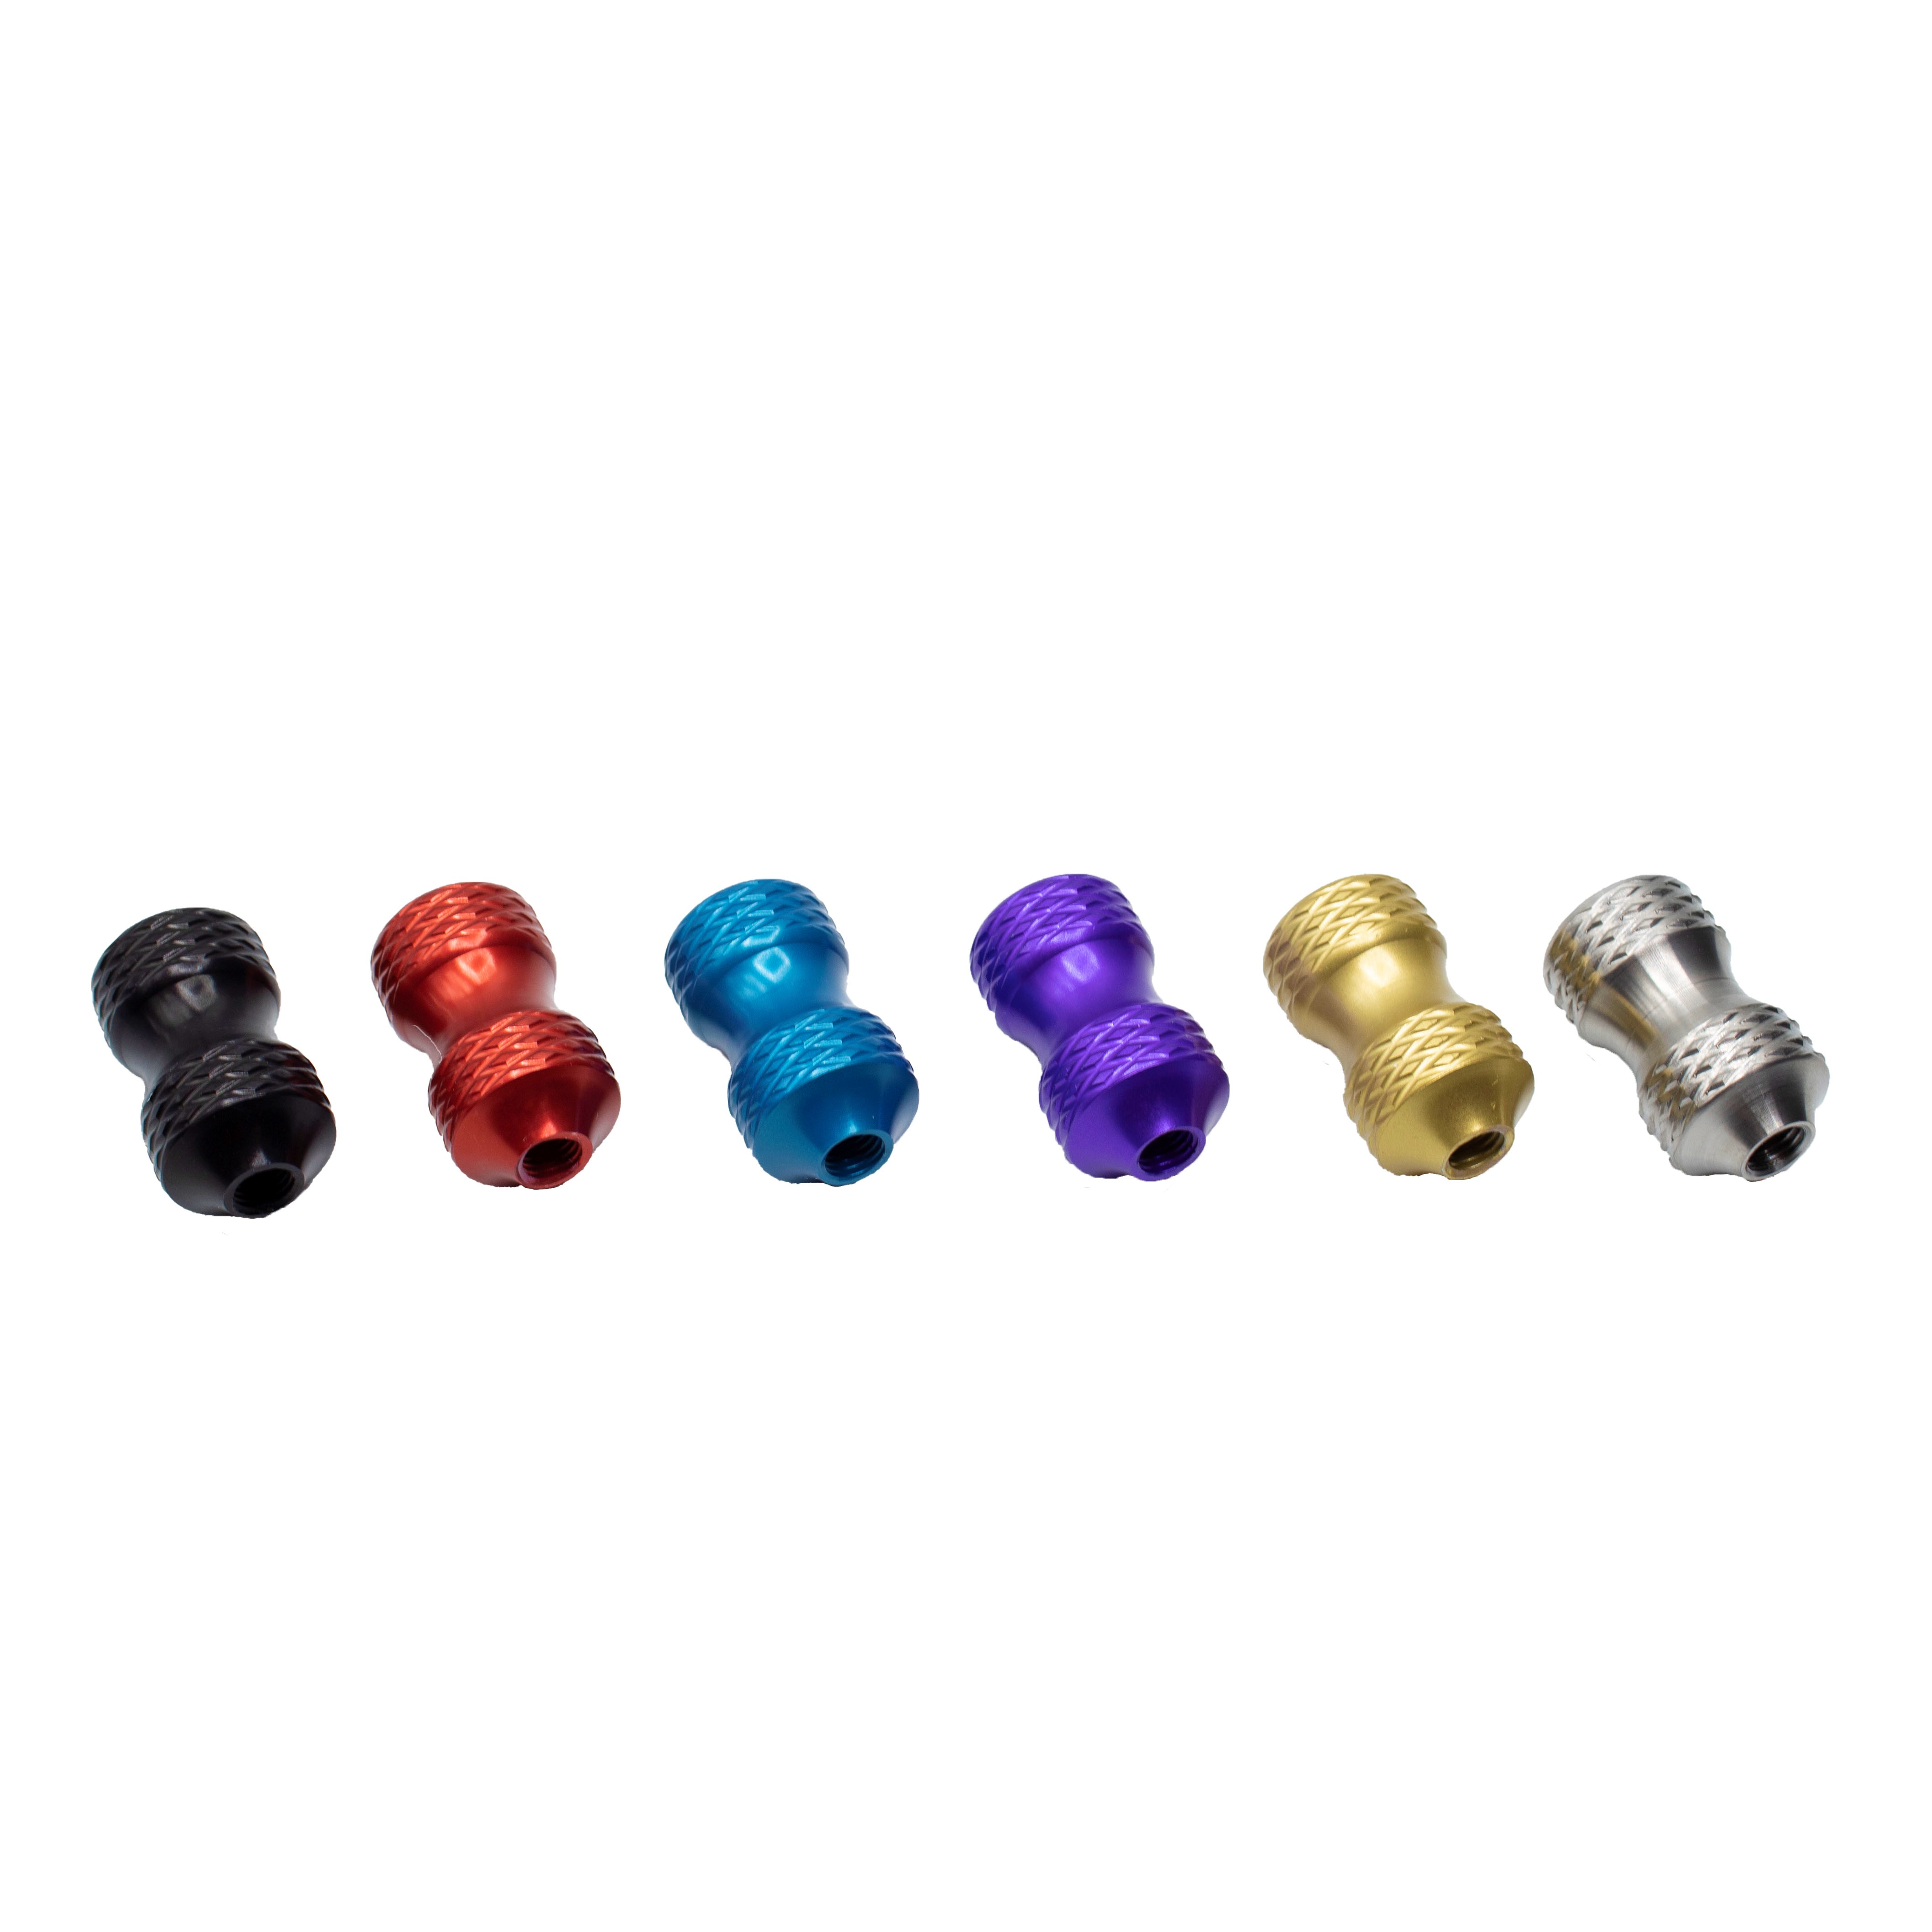 Is the little Bertha  xxxx  in black still a titanium just anodized? Also what is the weight pls?